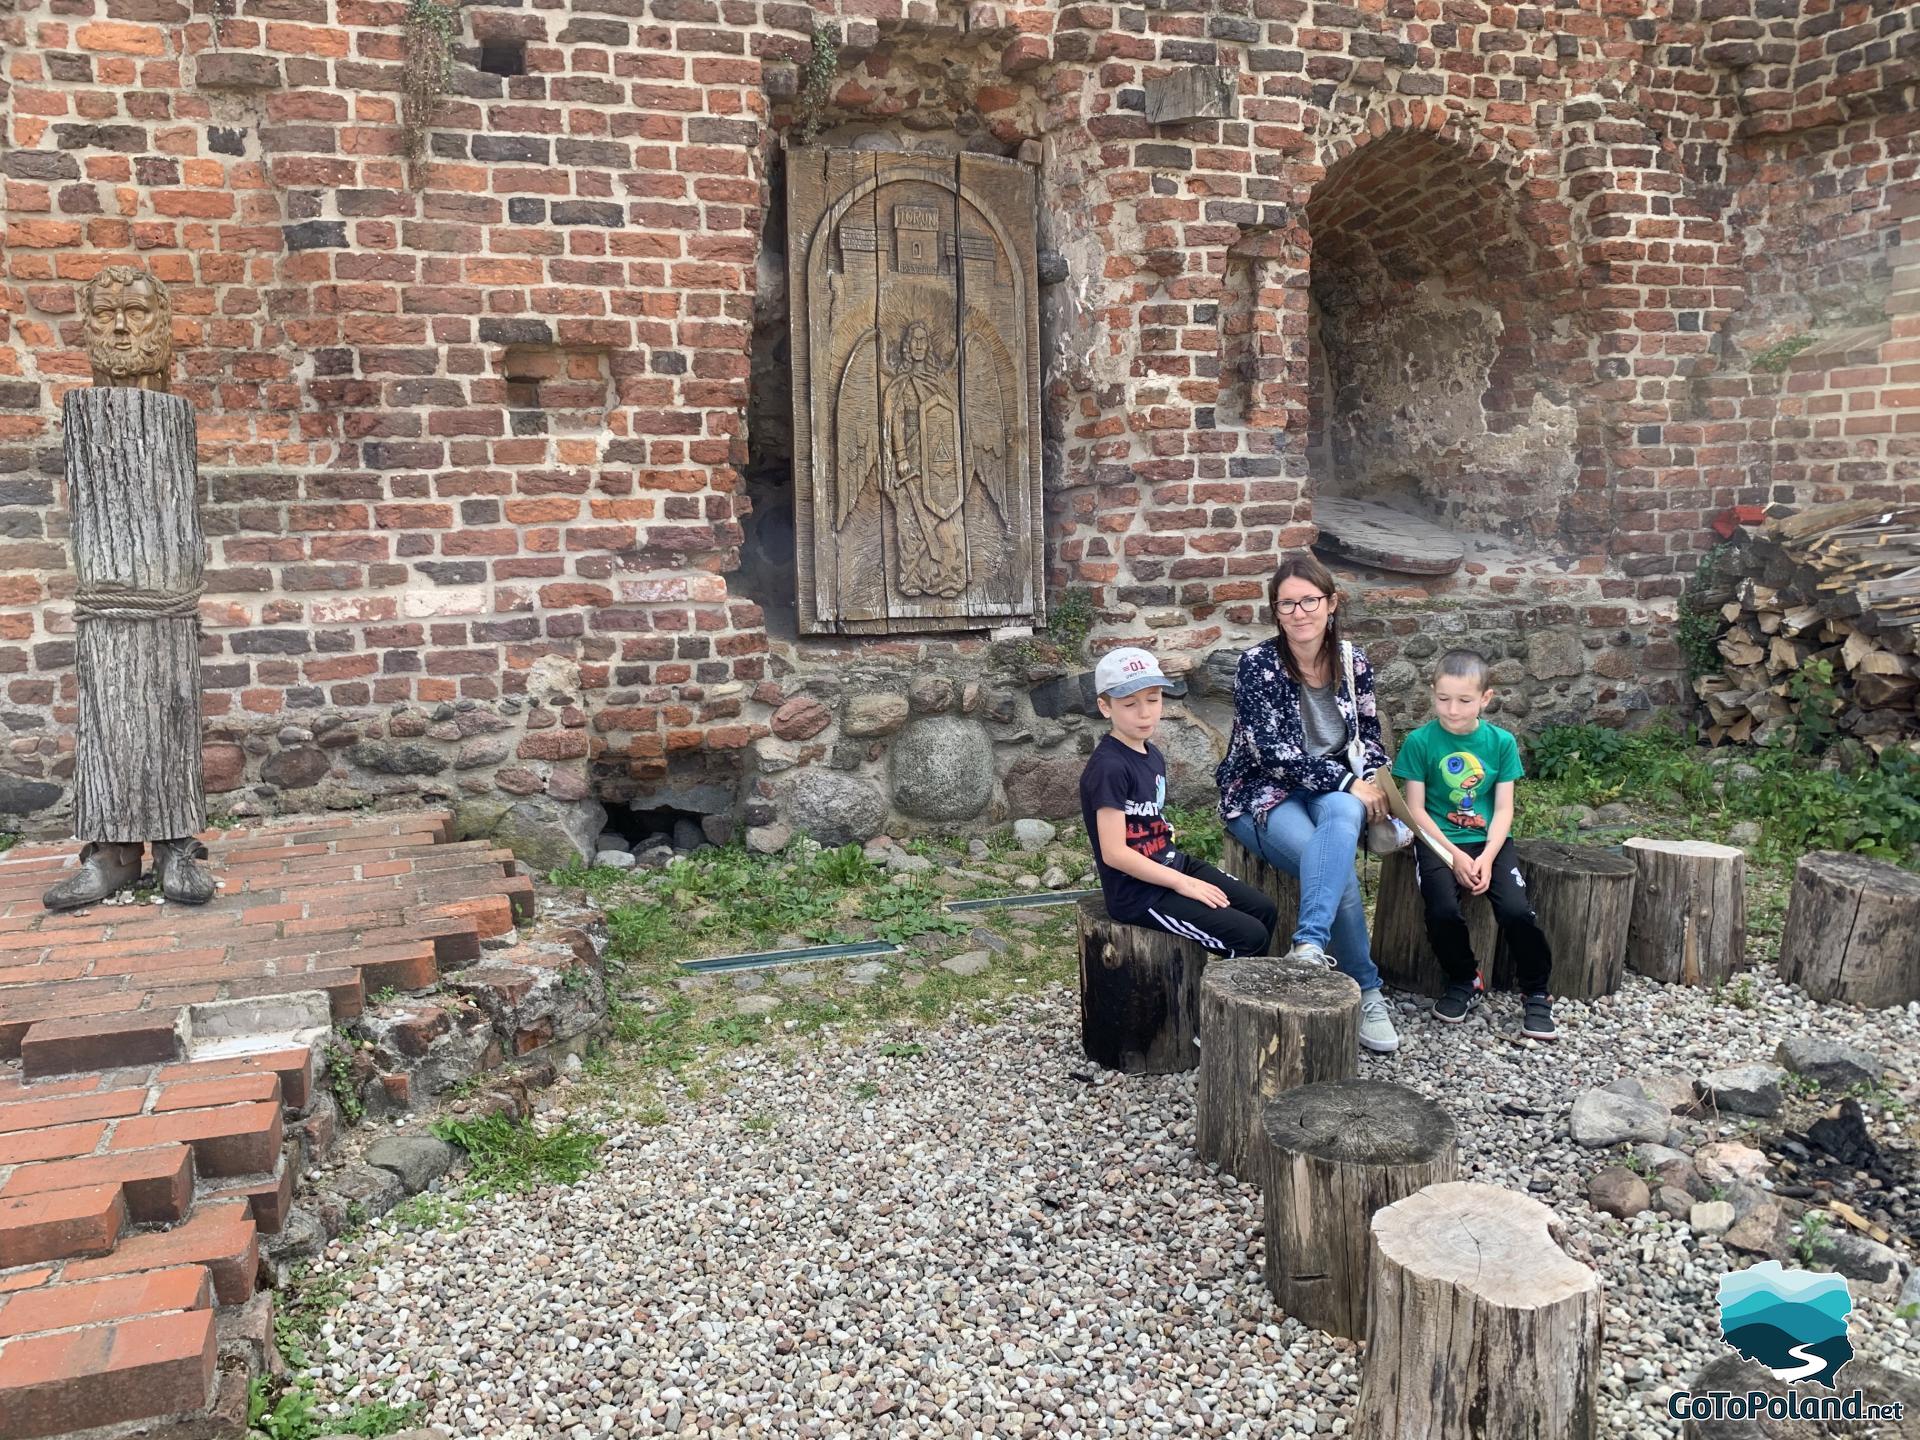 a woman and two children are sitting by the ruins of a castle on tree stumps